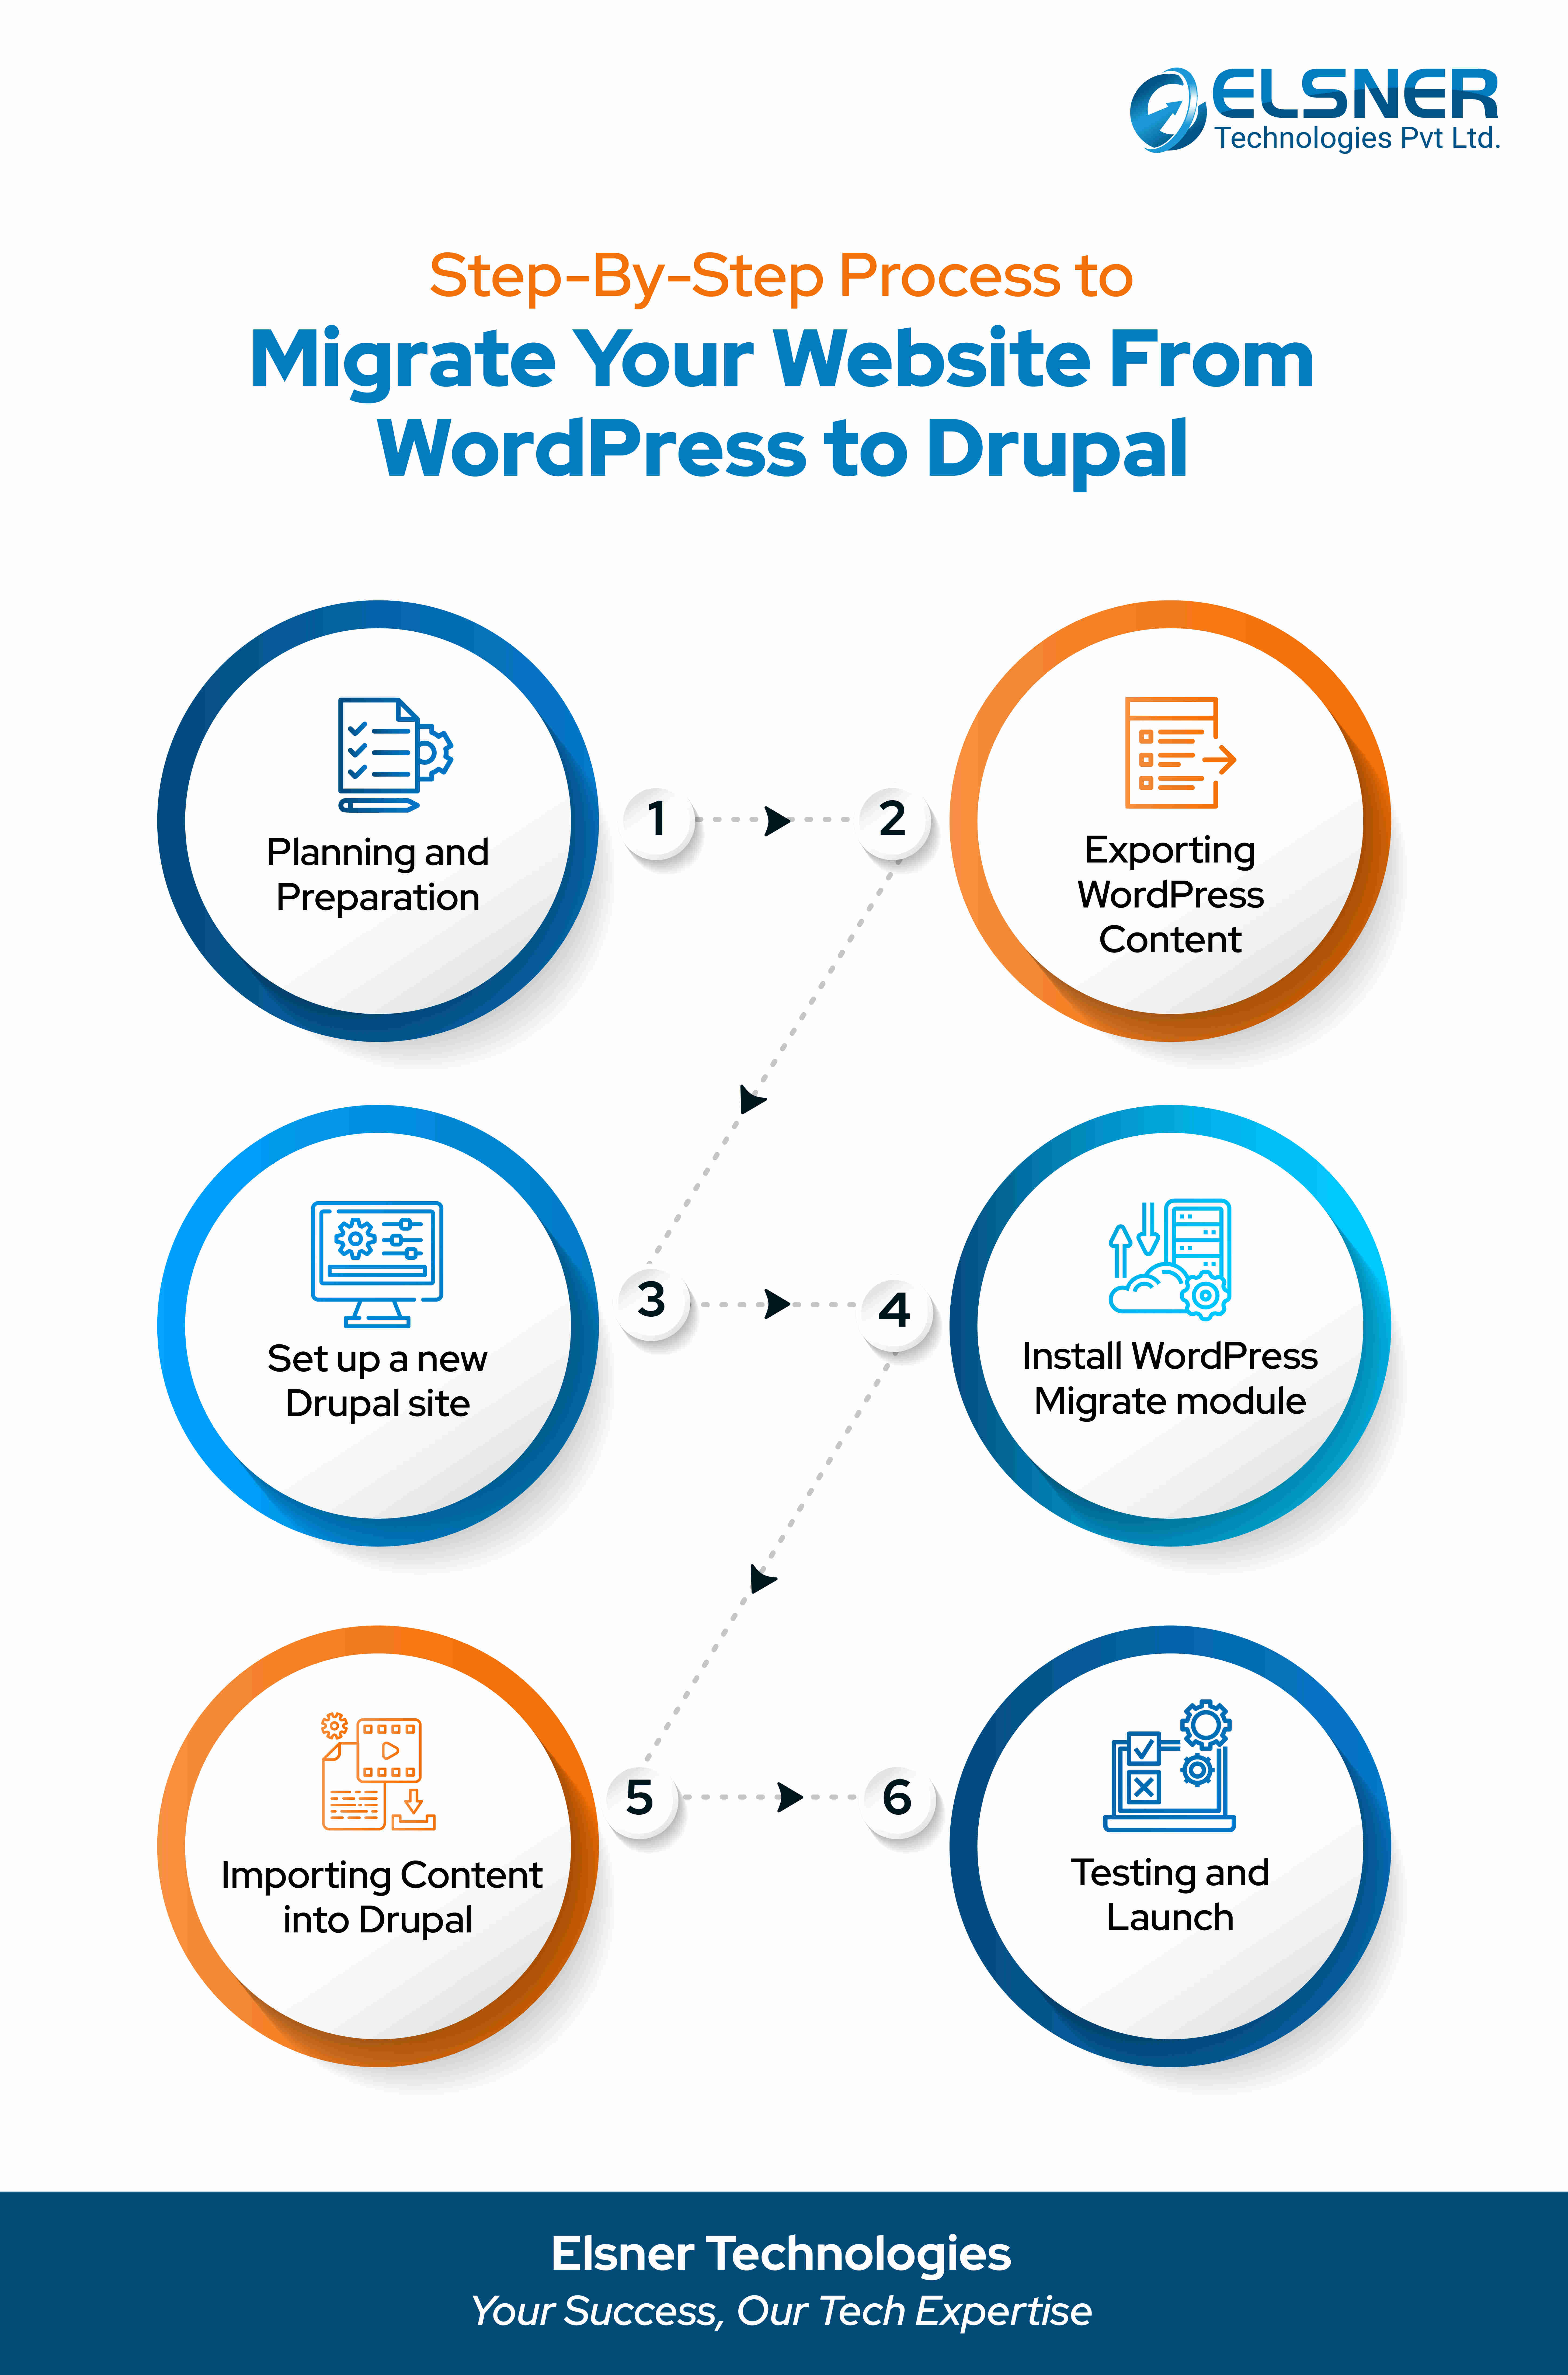 Migrate Your Website from WordPress to Drupal